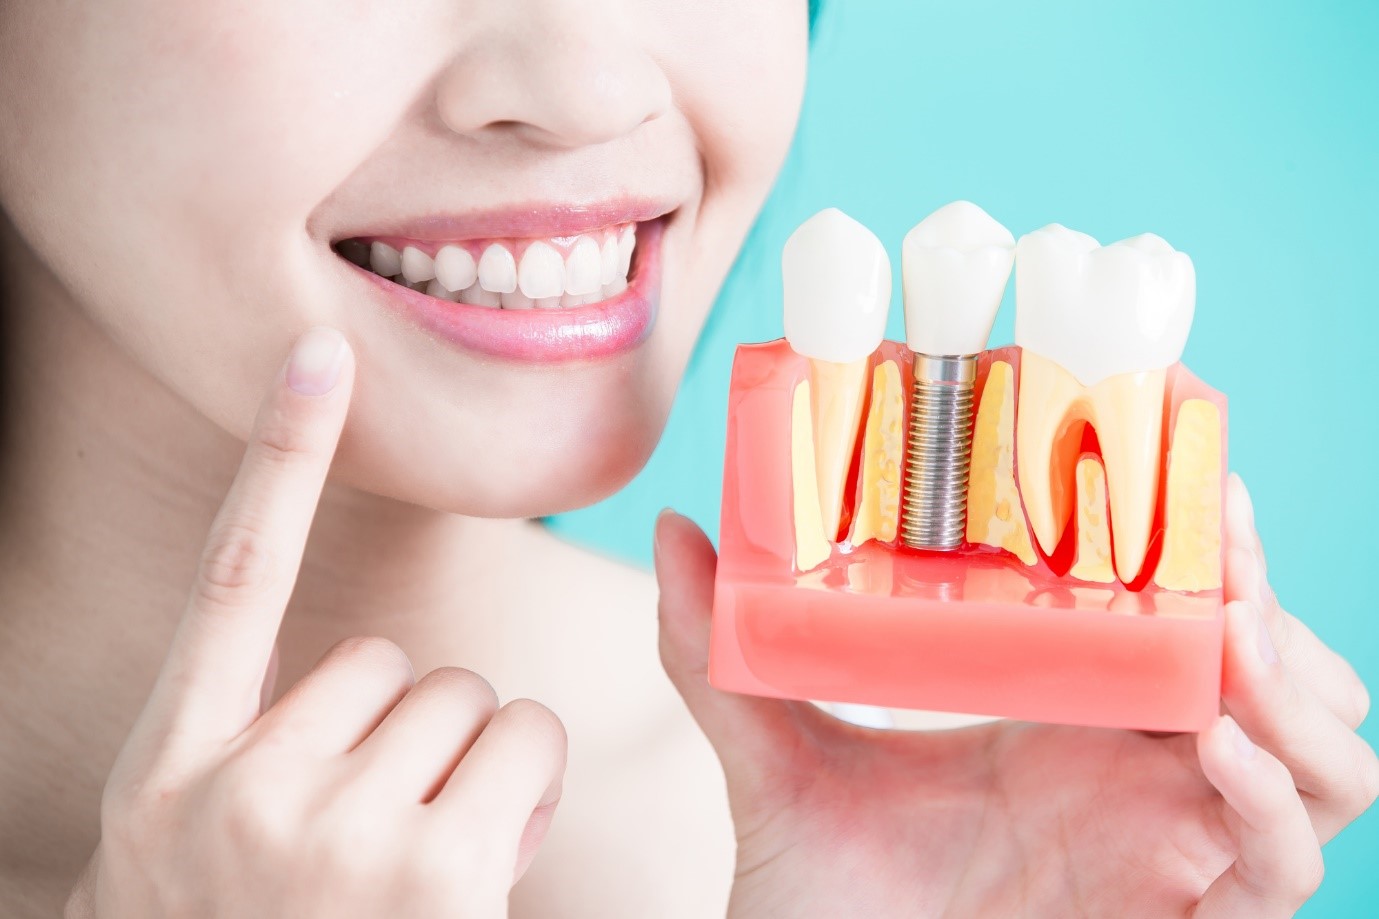 How much do teeth implants cost